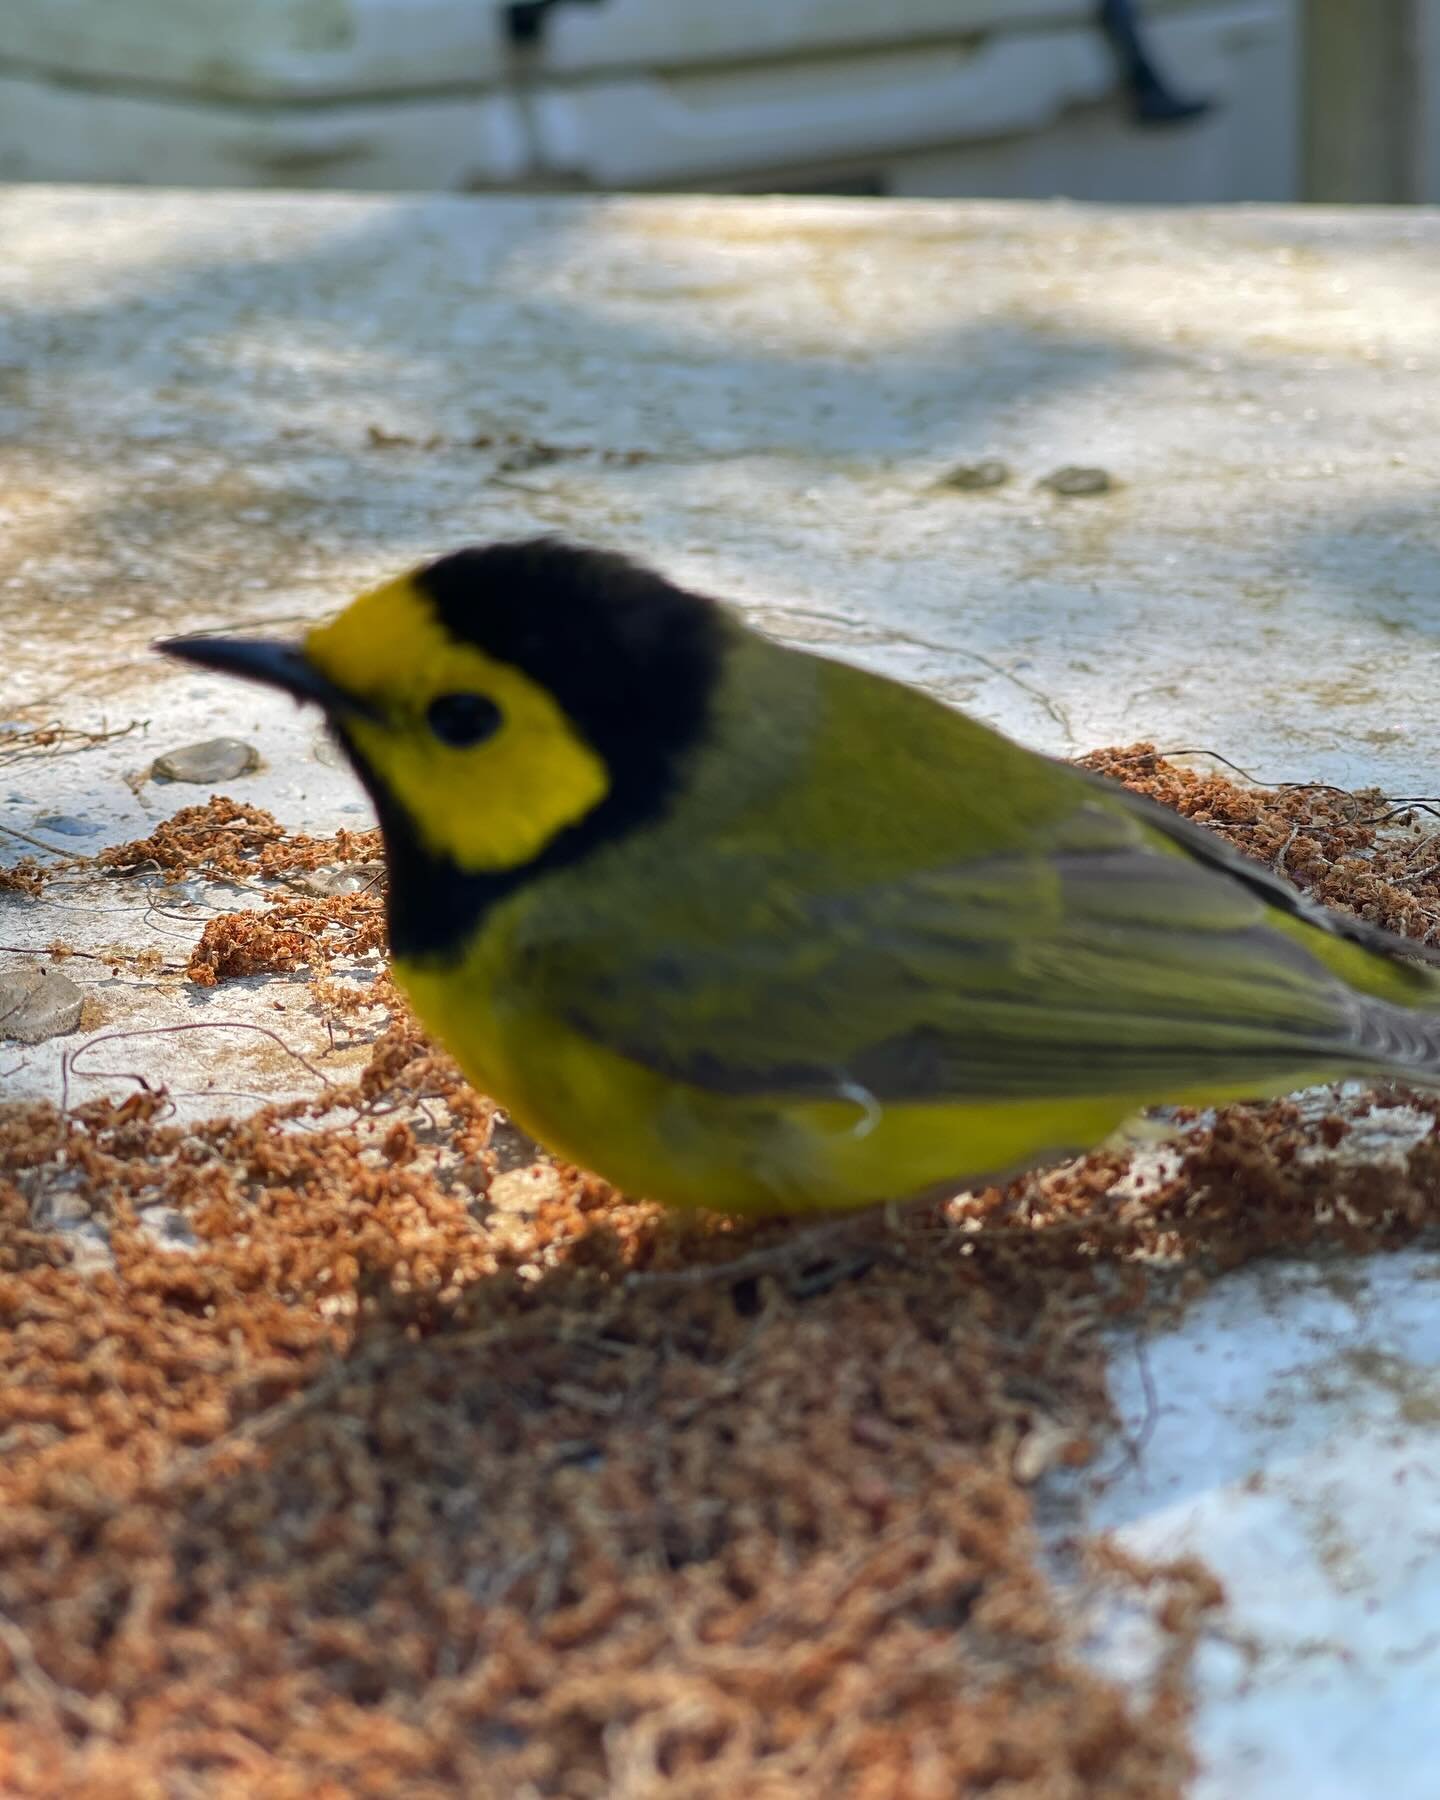 We had a hooded warbler join us for our Mother&rsquo;s Day workshop yesterday. This pretty girl bumped into a window and needed a few minutes to recover (away from Boone&rsquo;s nosy nose. 🐕&zwj;🦺)

What a gift to see her beautiful colors up close!